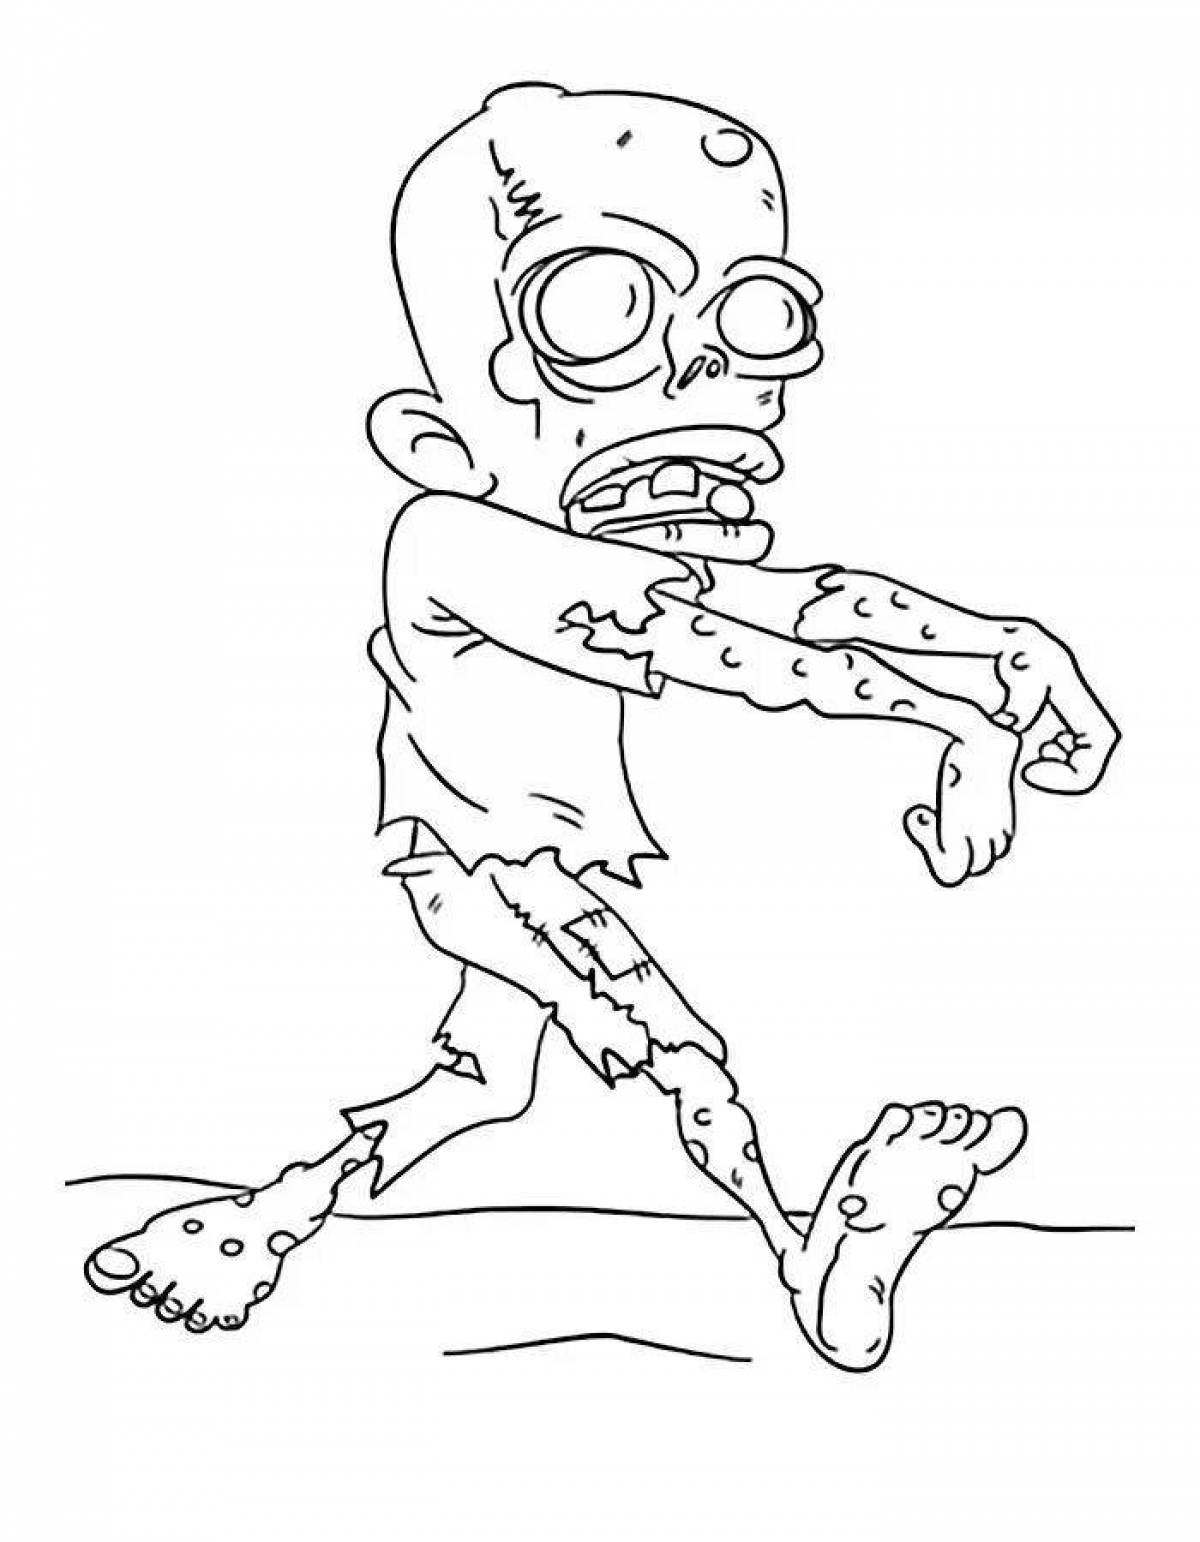 Horrifying zombie sketchers coloring book